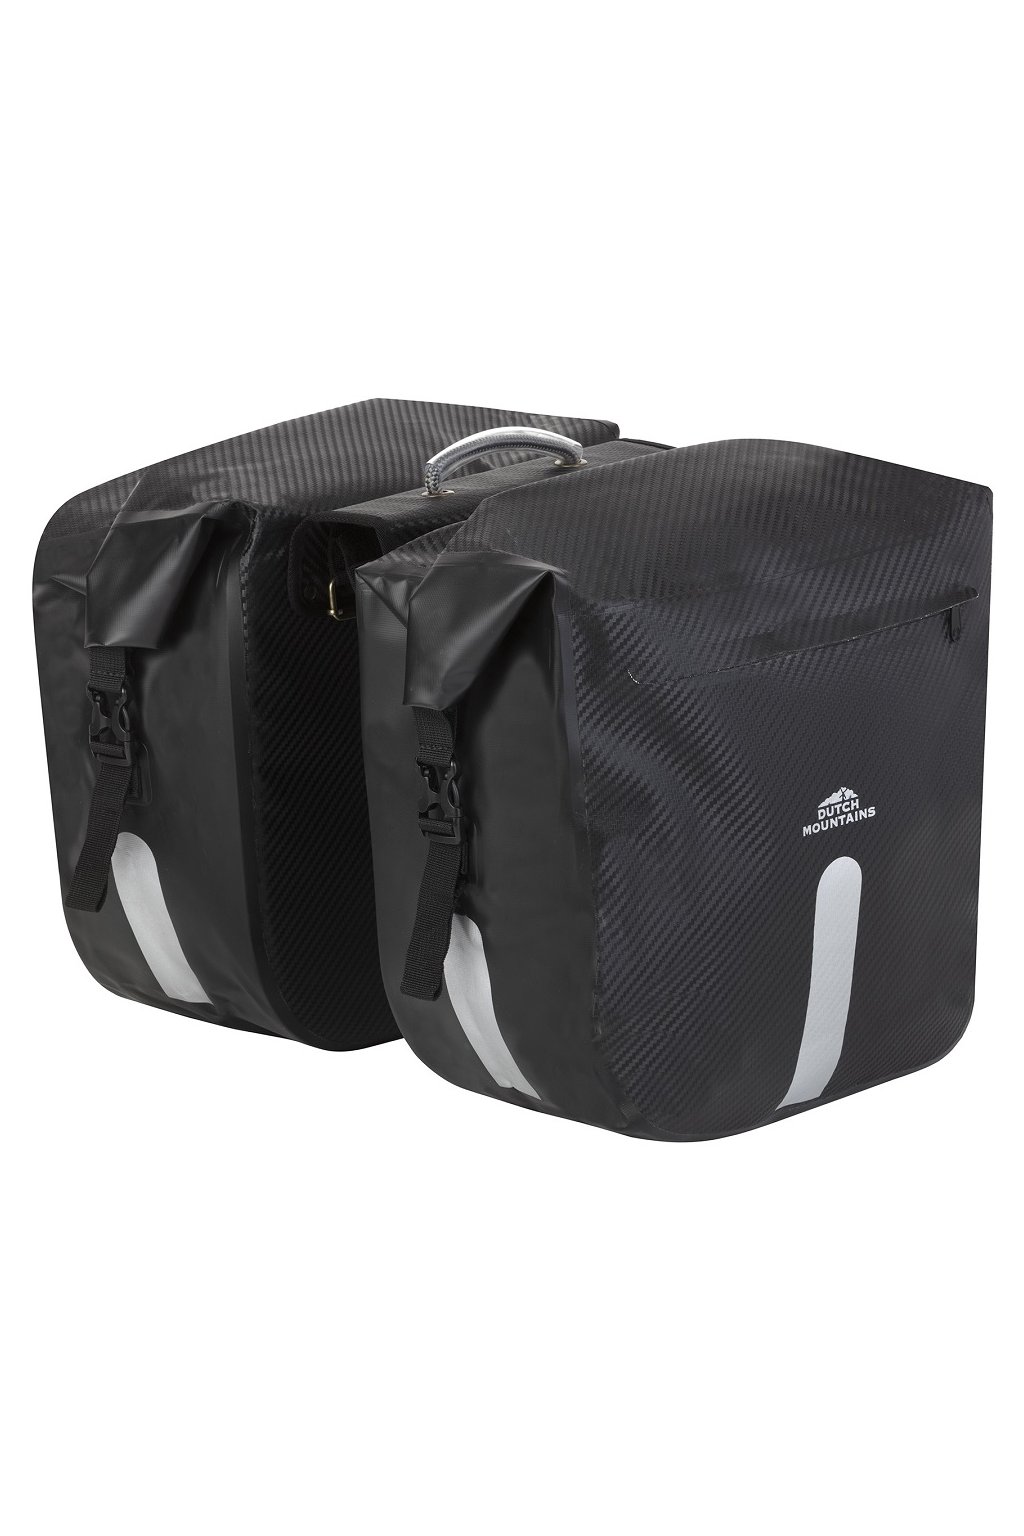 kufrland dutchmountains dmbicyclebags double (2)